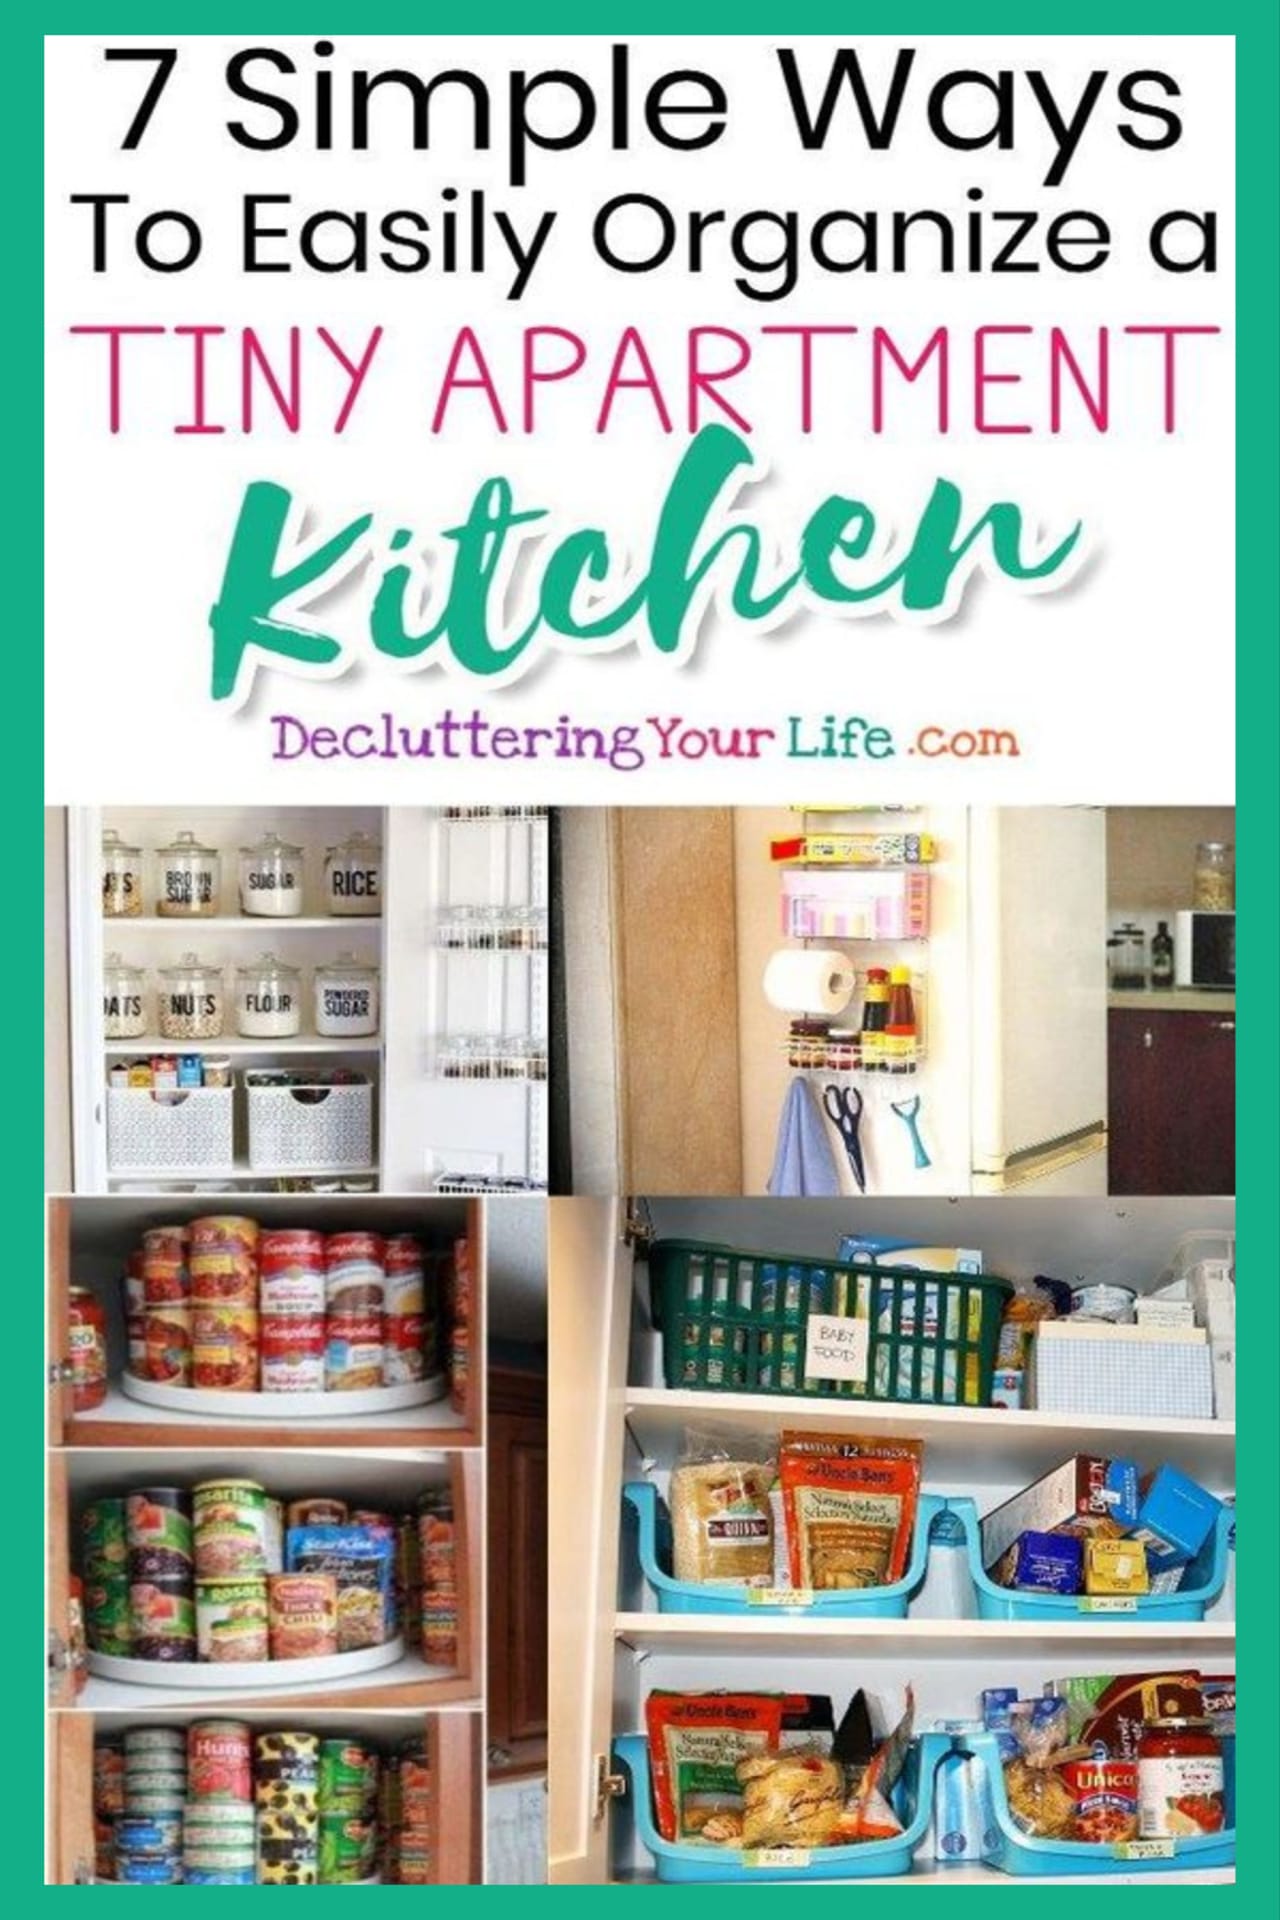 Small apartment kitchen storage and organization hacks for maximizing space in small kitchens (with or with a pantry).  Clever ways  for organizing a kitchen with no storage space - even if you're on a budget